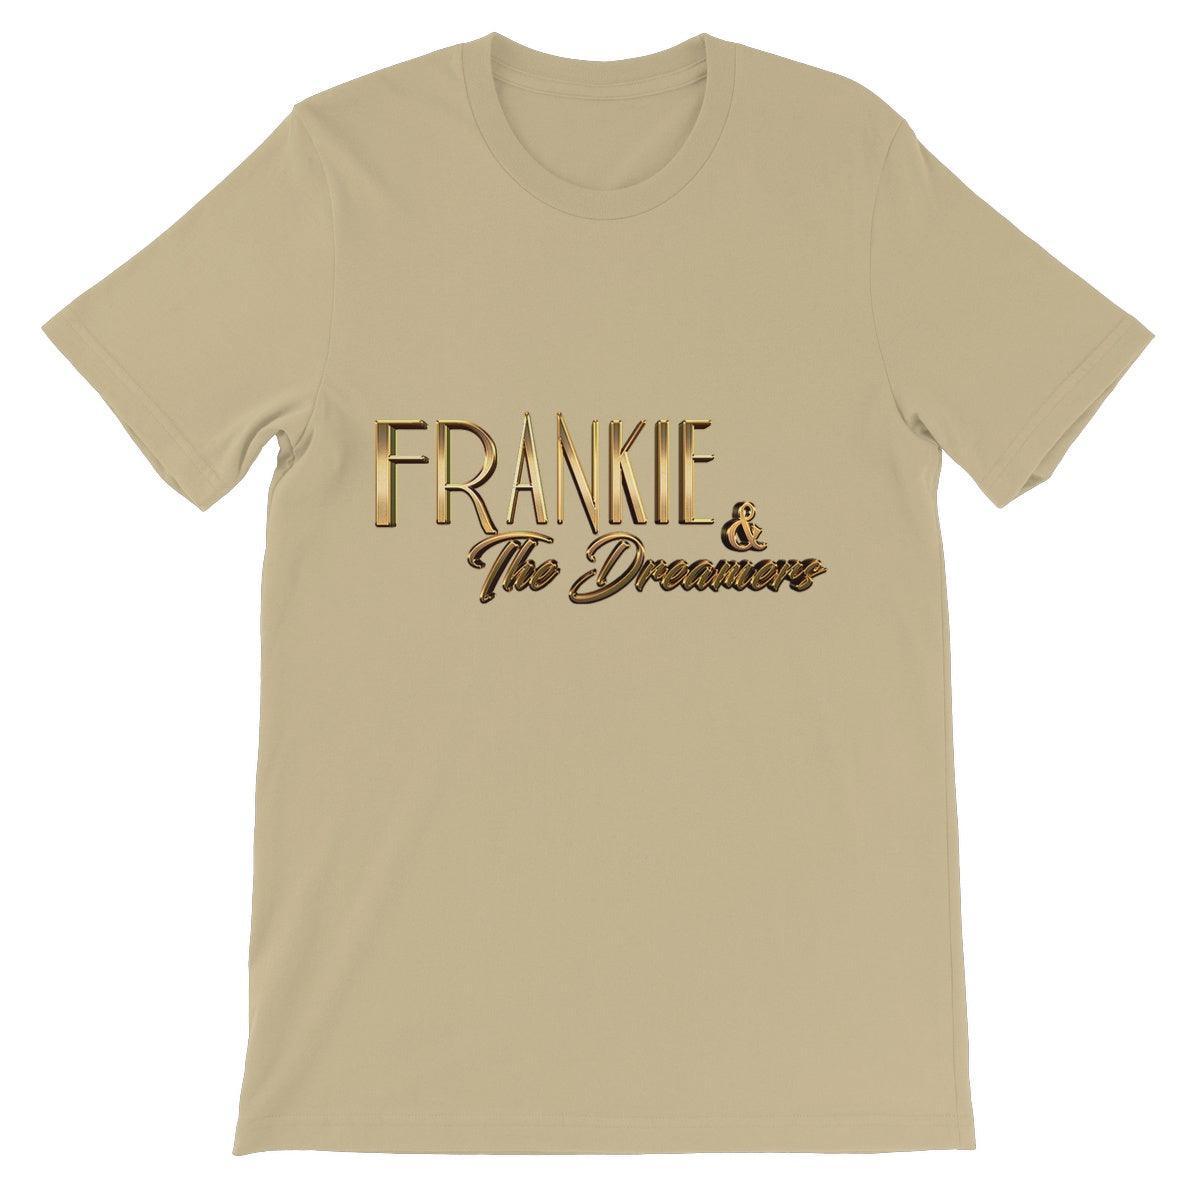 Frankie And The Dreamers Unisex Short Sleeve T-Shirt | Apparel Soft Cream